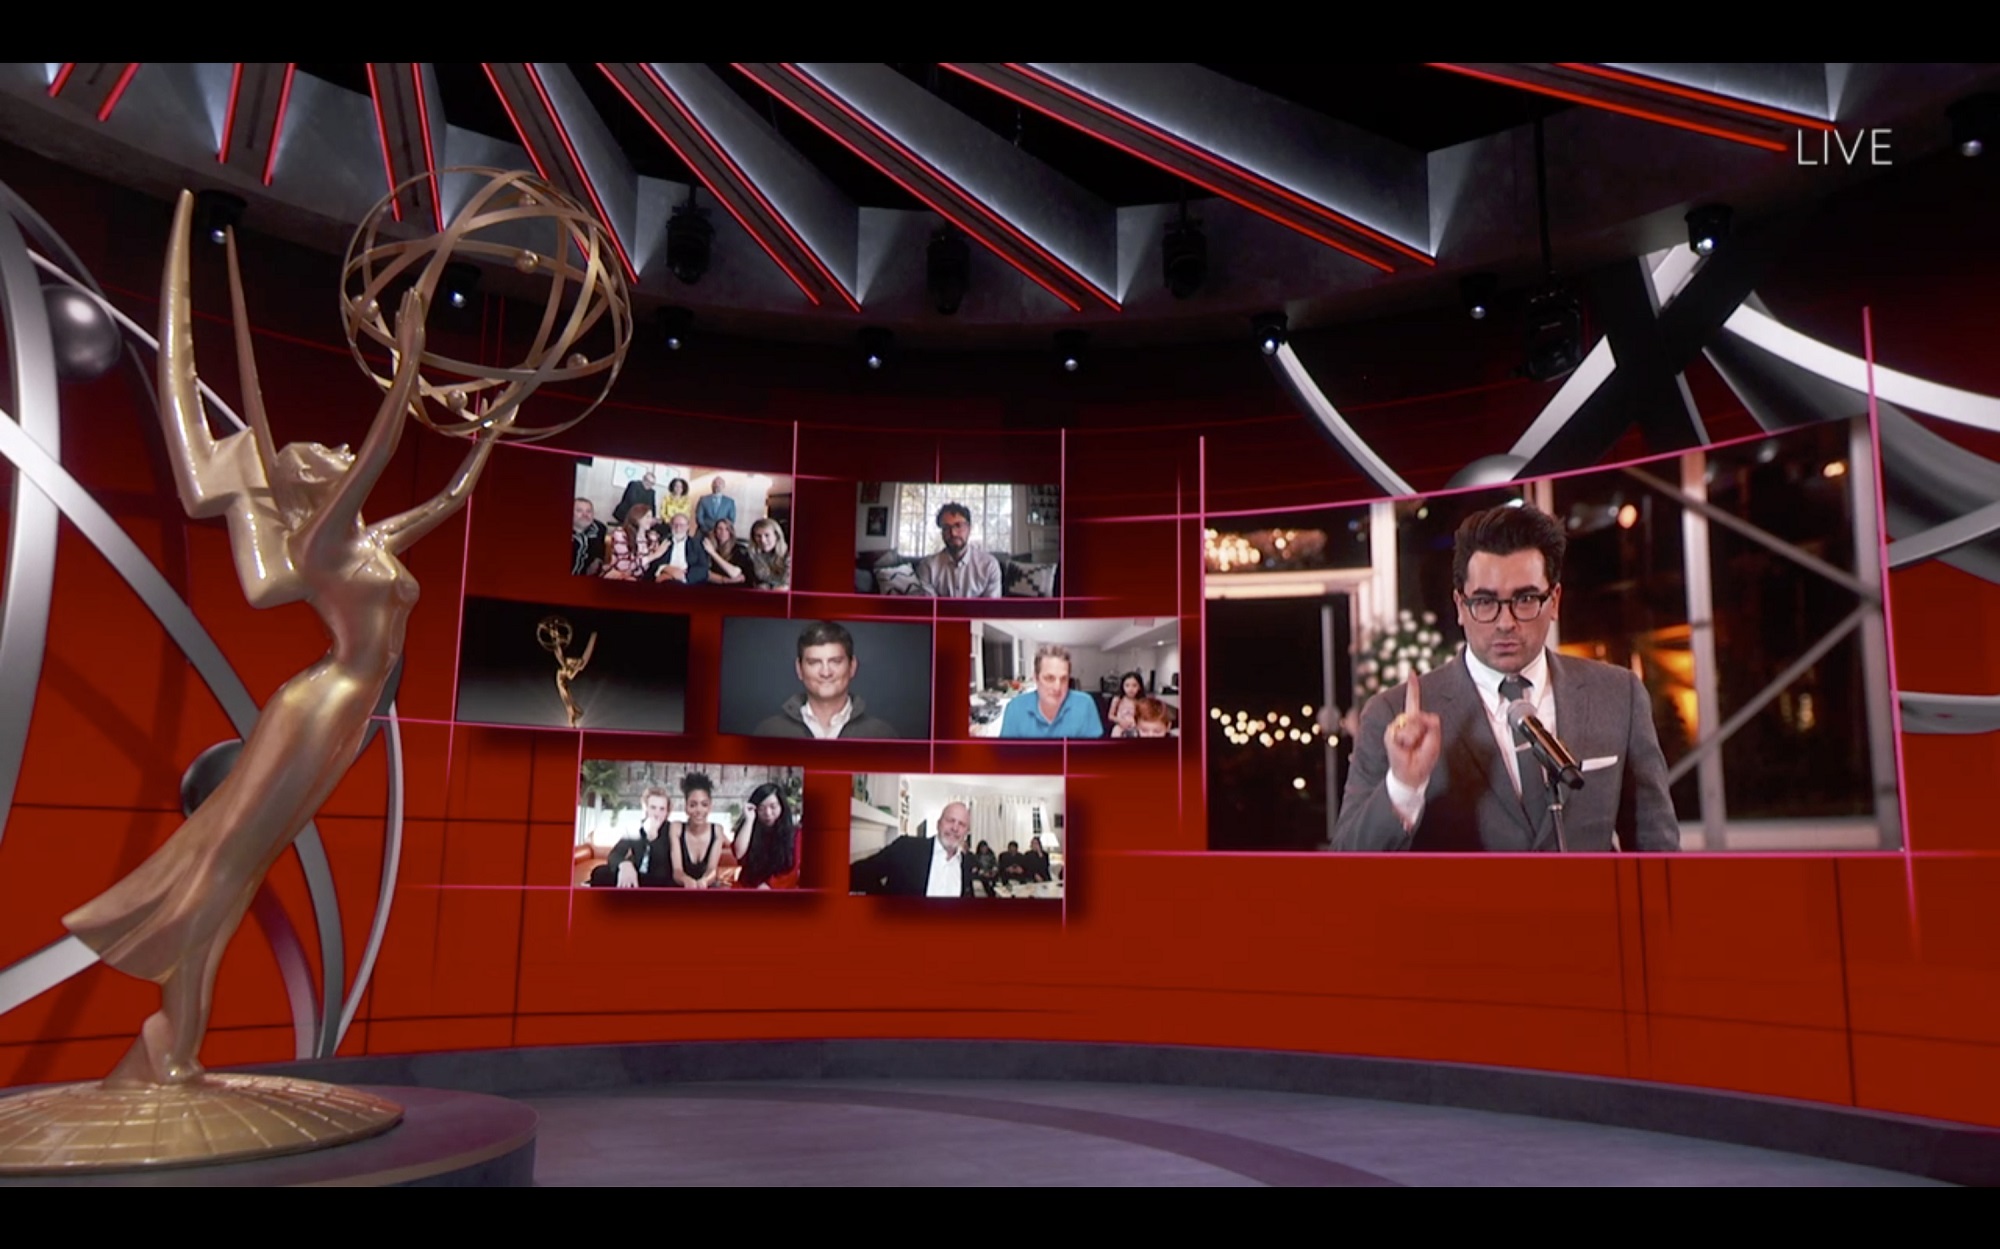 Emmys Pre-Show 2021: 5 Times The Emmys Have Been Revoked or Withdrawn